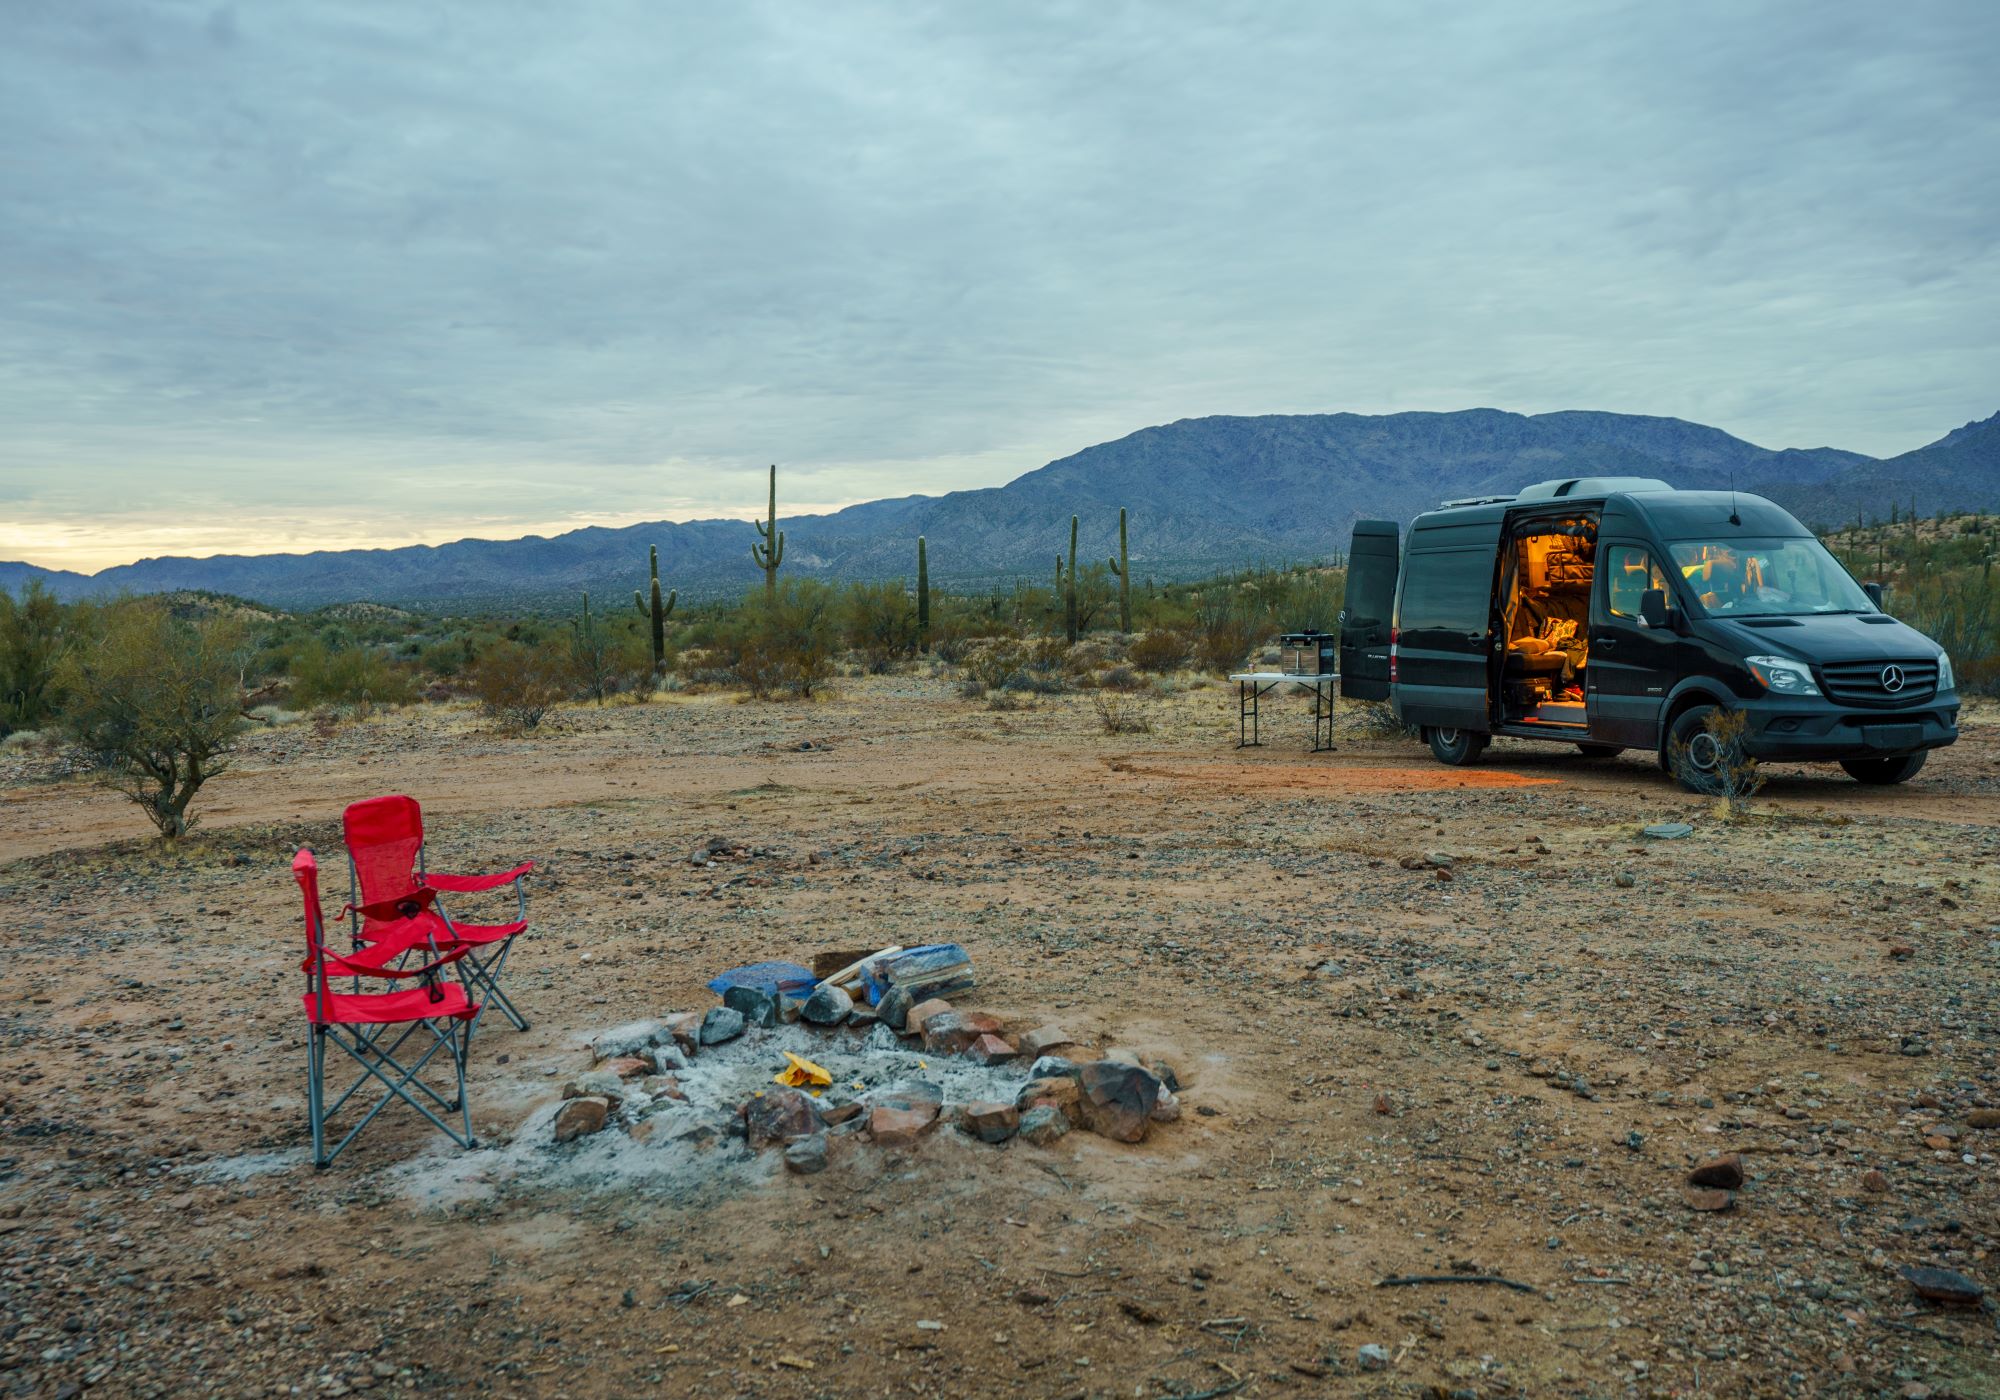 A rental camper van sits in a desert style area with a red chair sitting next to a campfire that recently went out.